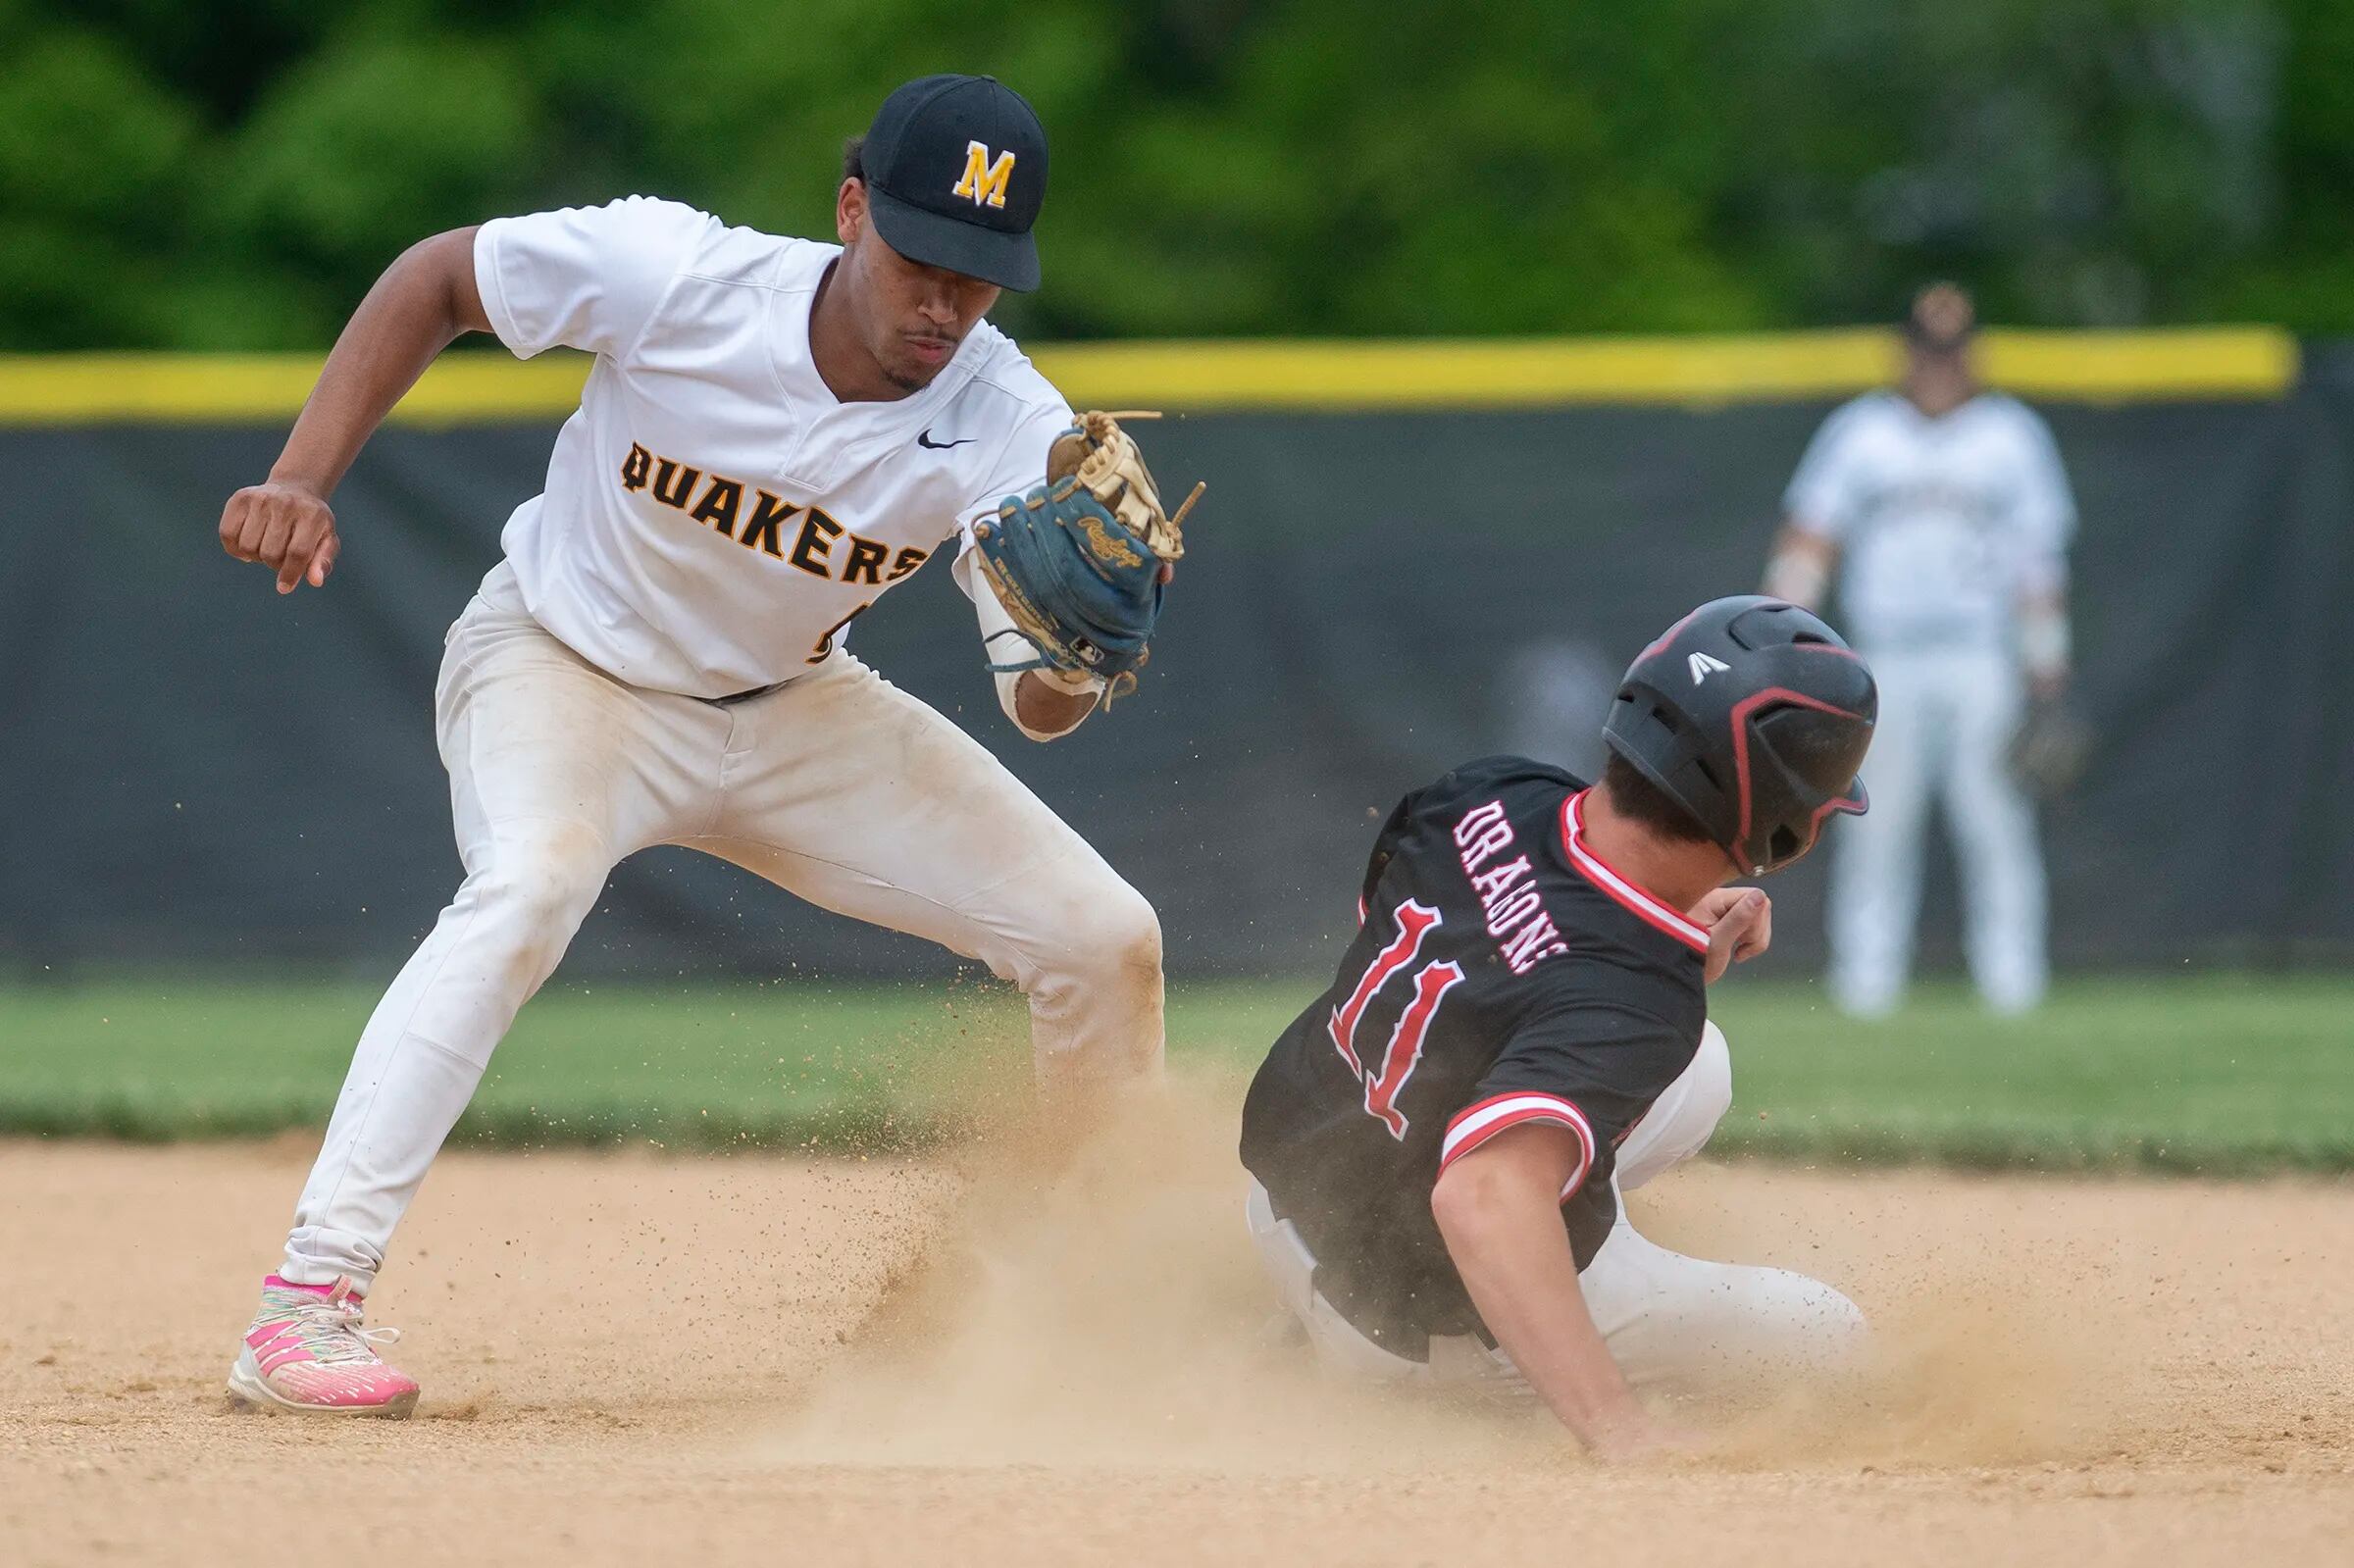 Shortstop Maximus Martin heads to Rutgers with lessons learned